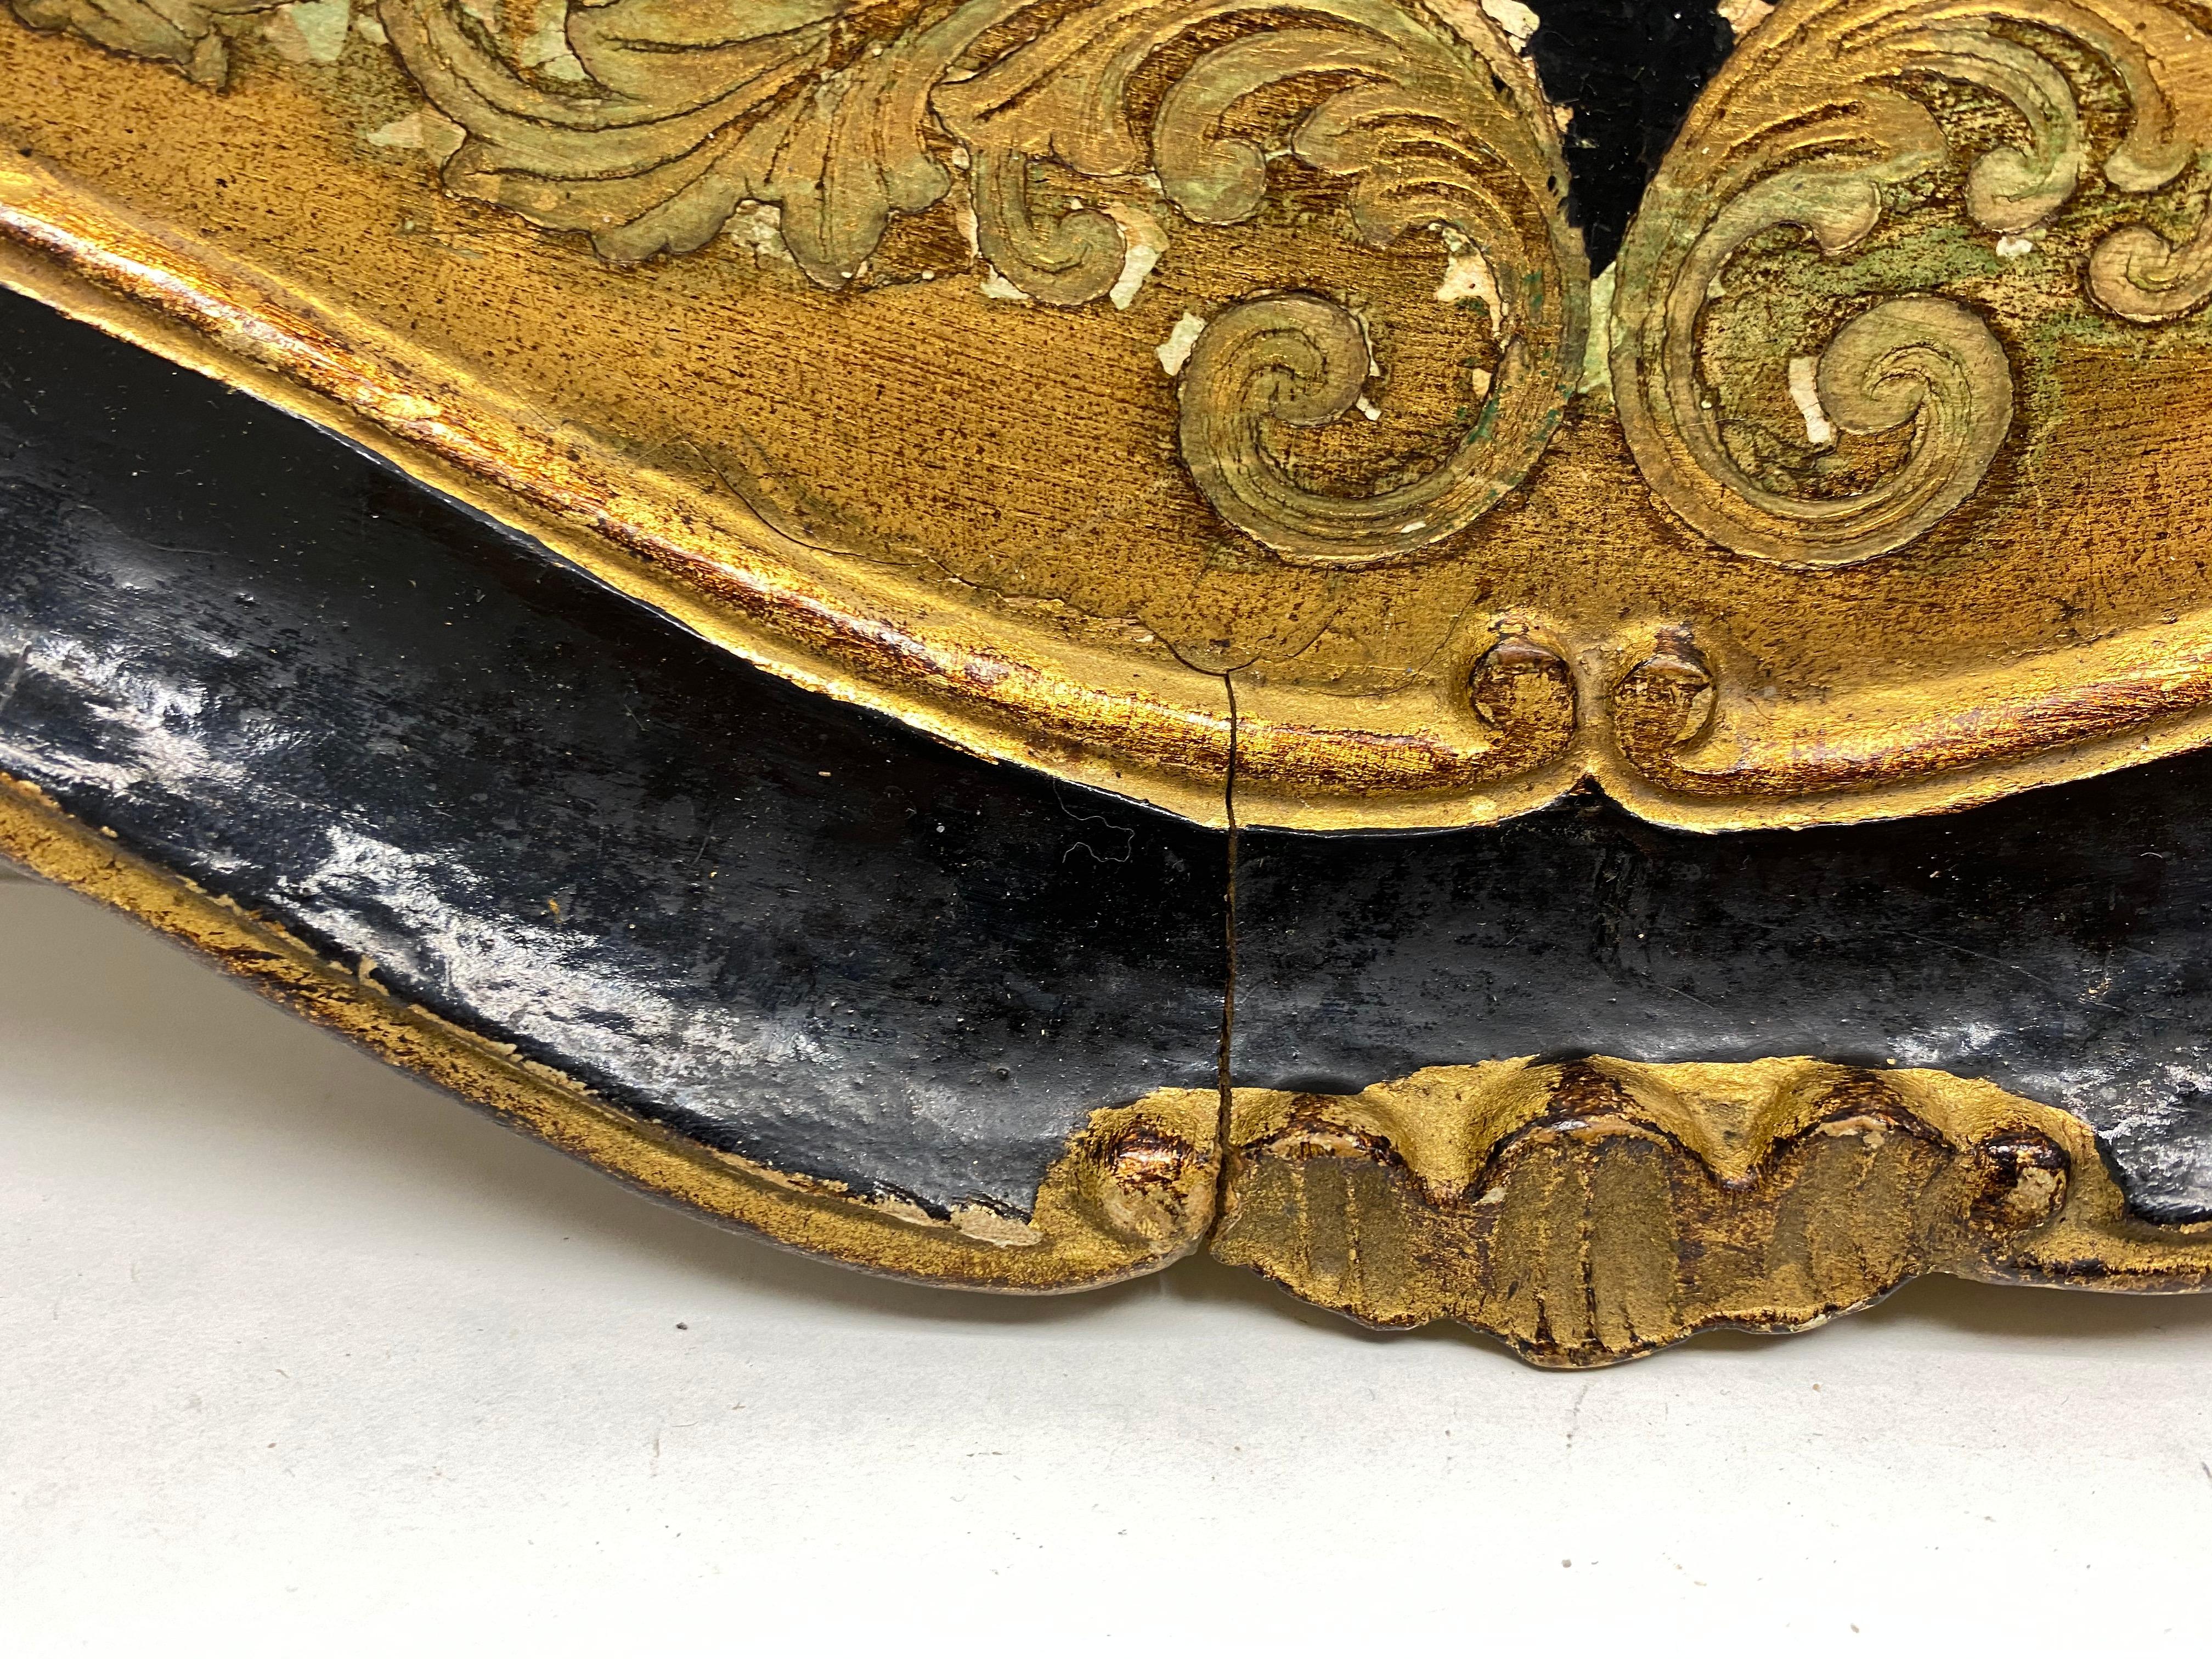 Hollywood Regency Italian Florentine Black and Gold Giltwood Serving Tray Toleware Tole, 1950s For Sale